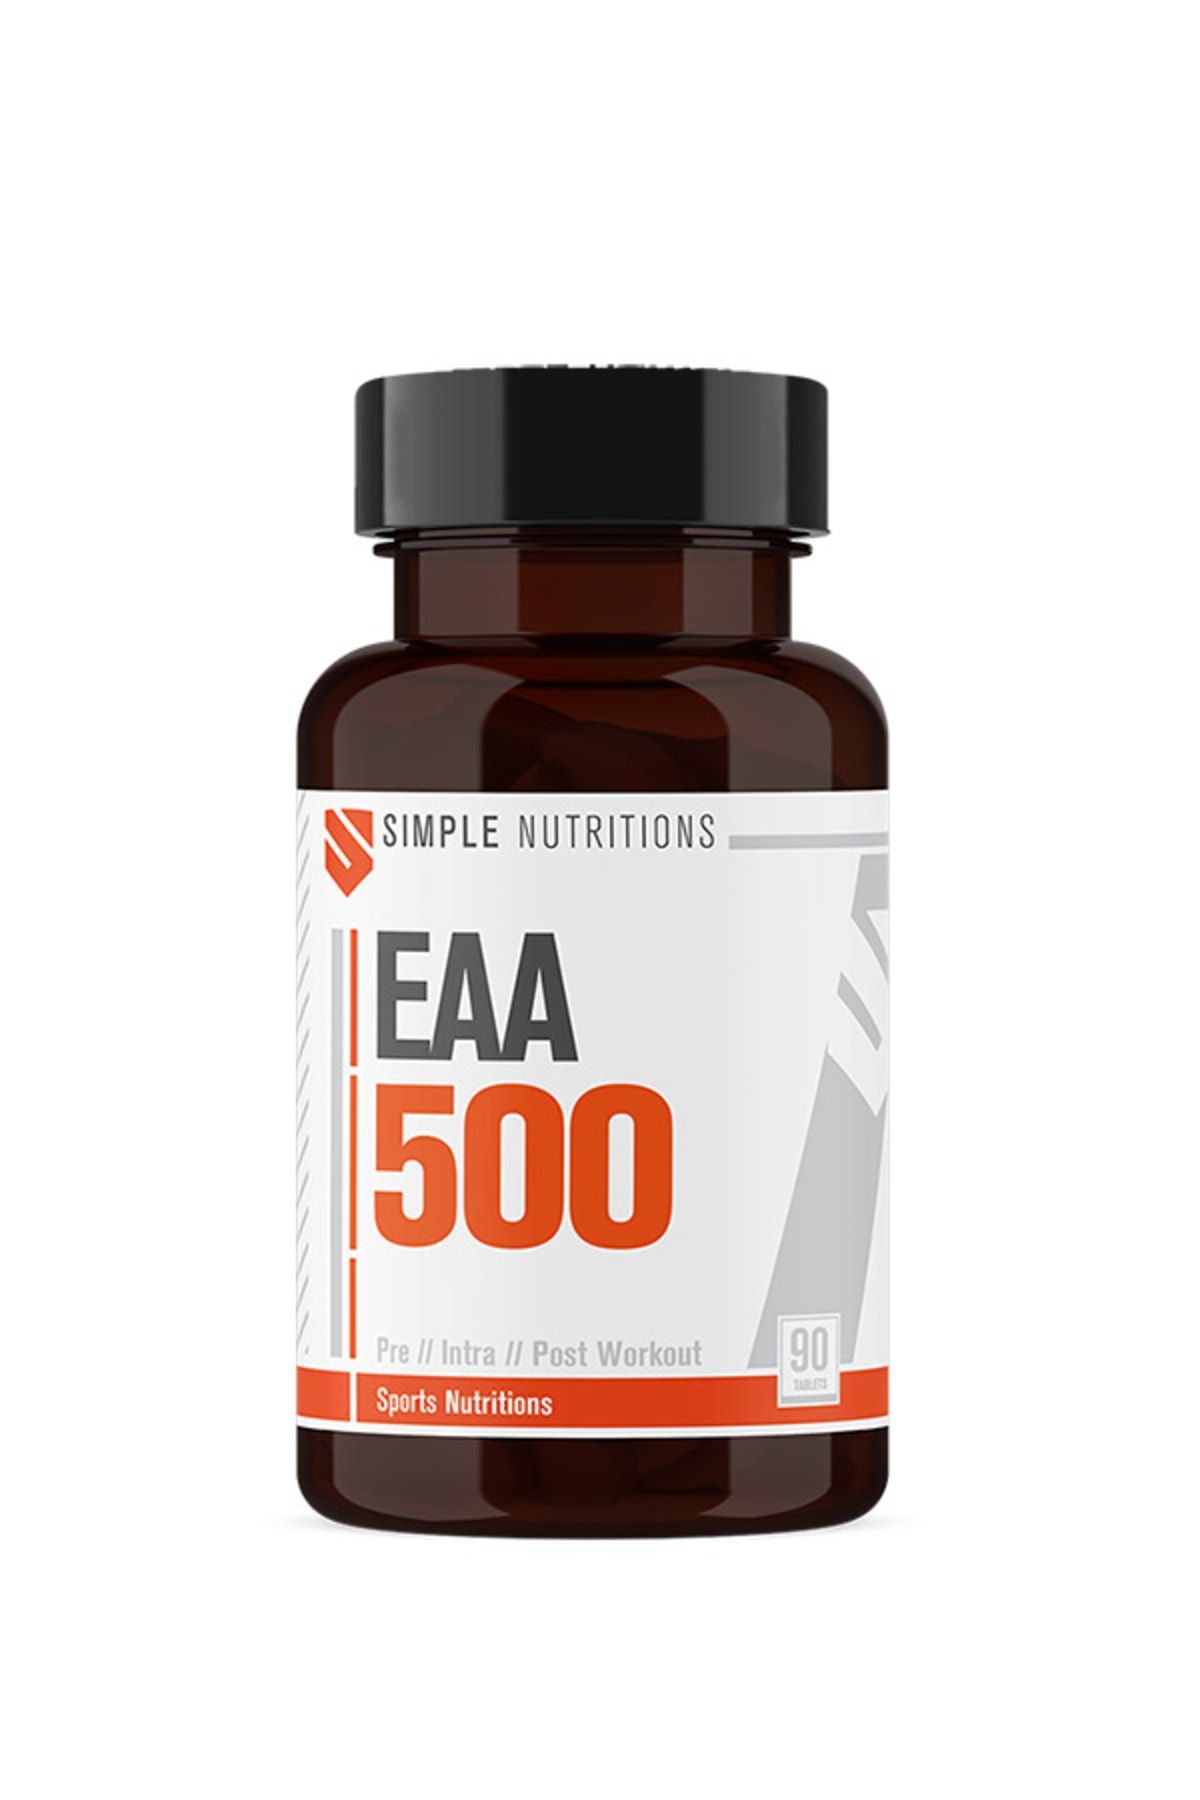 Simple Nutritions Eaa 500 Mg 90 Tablet